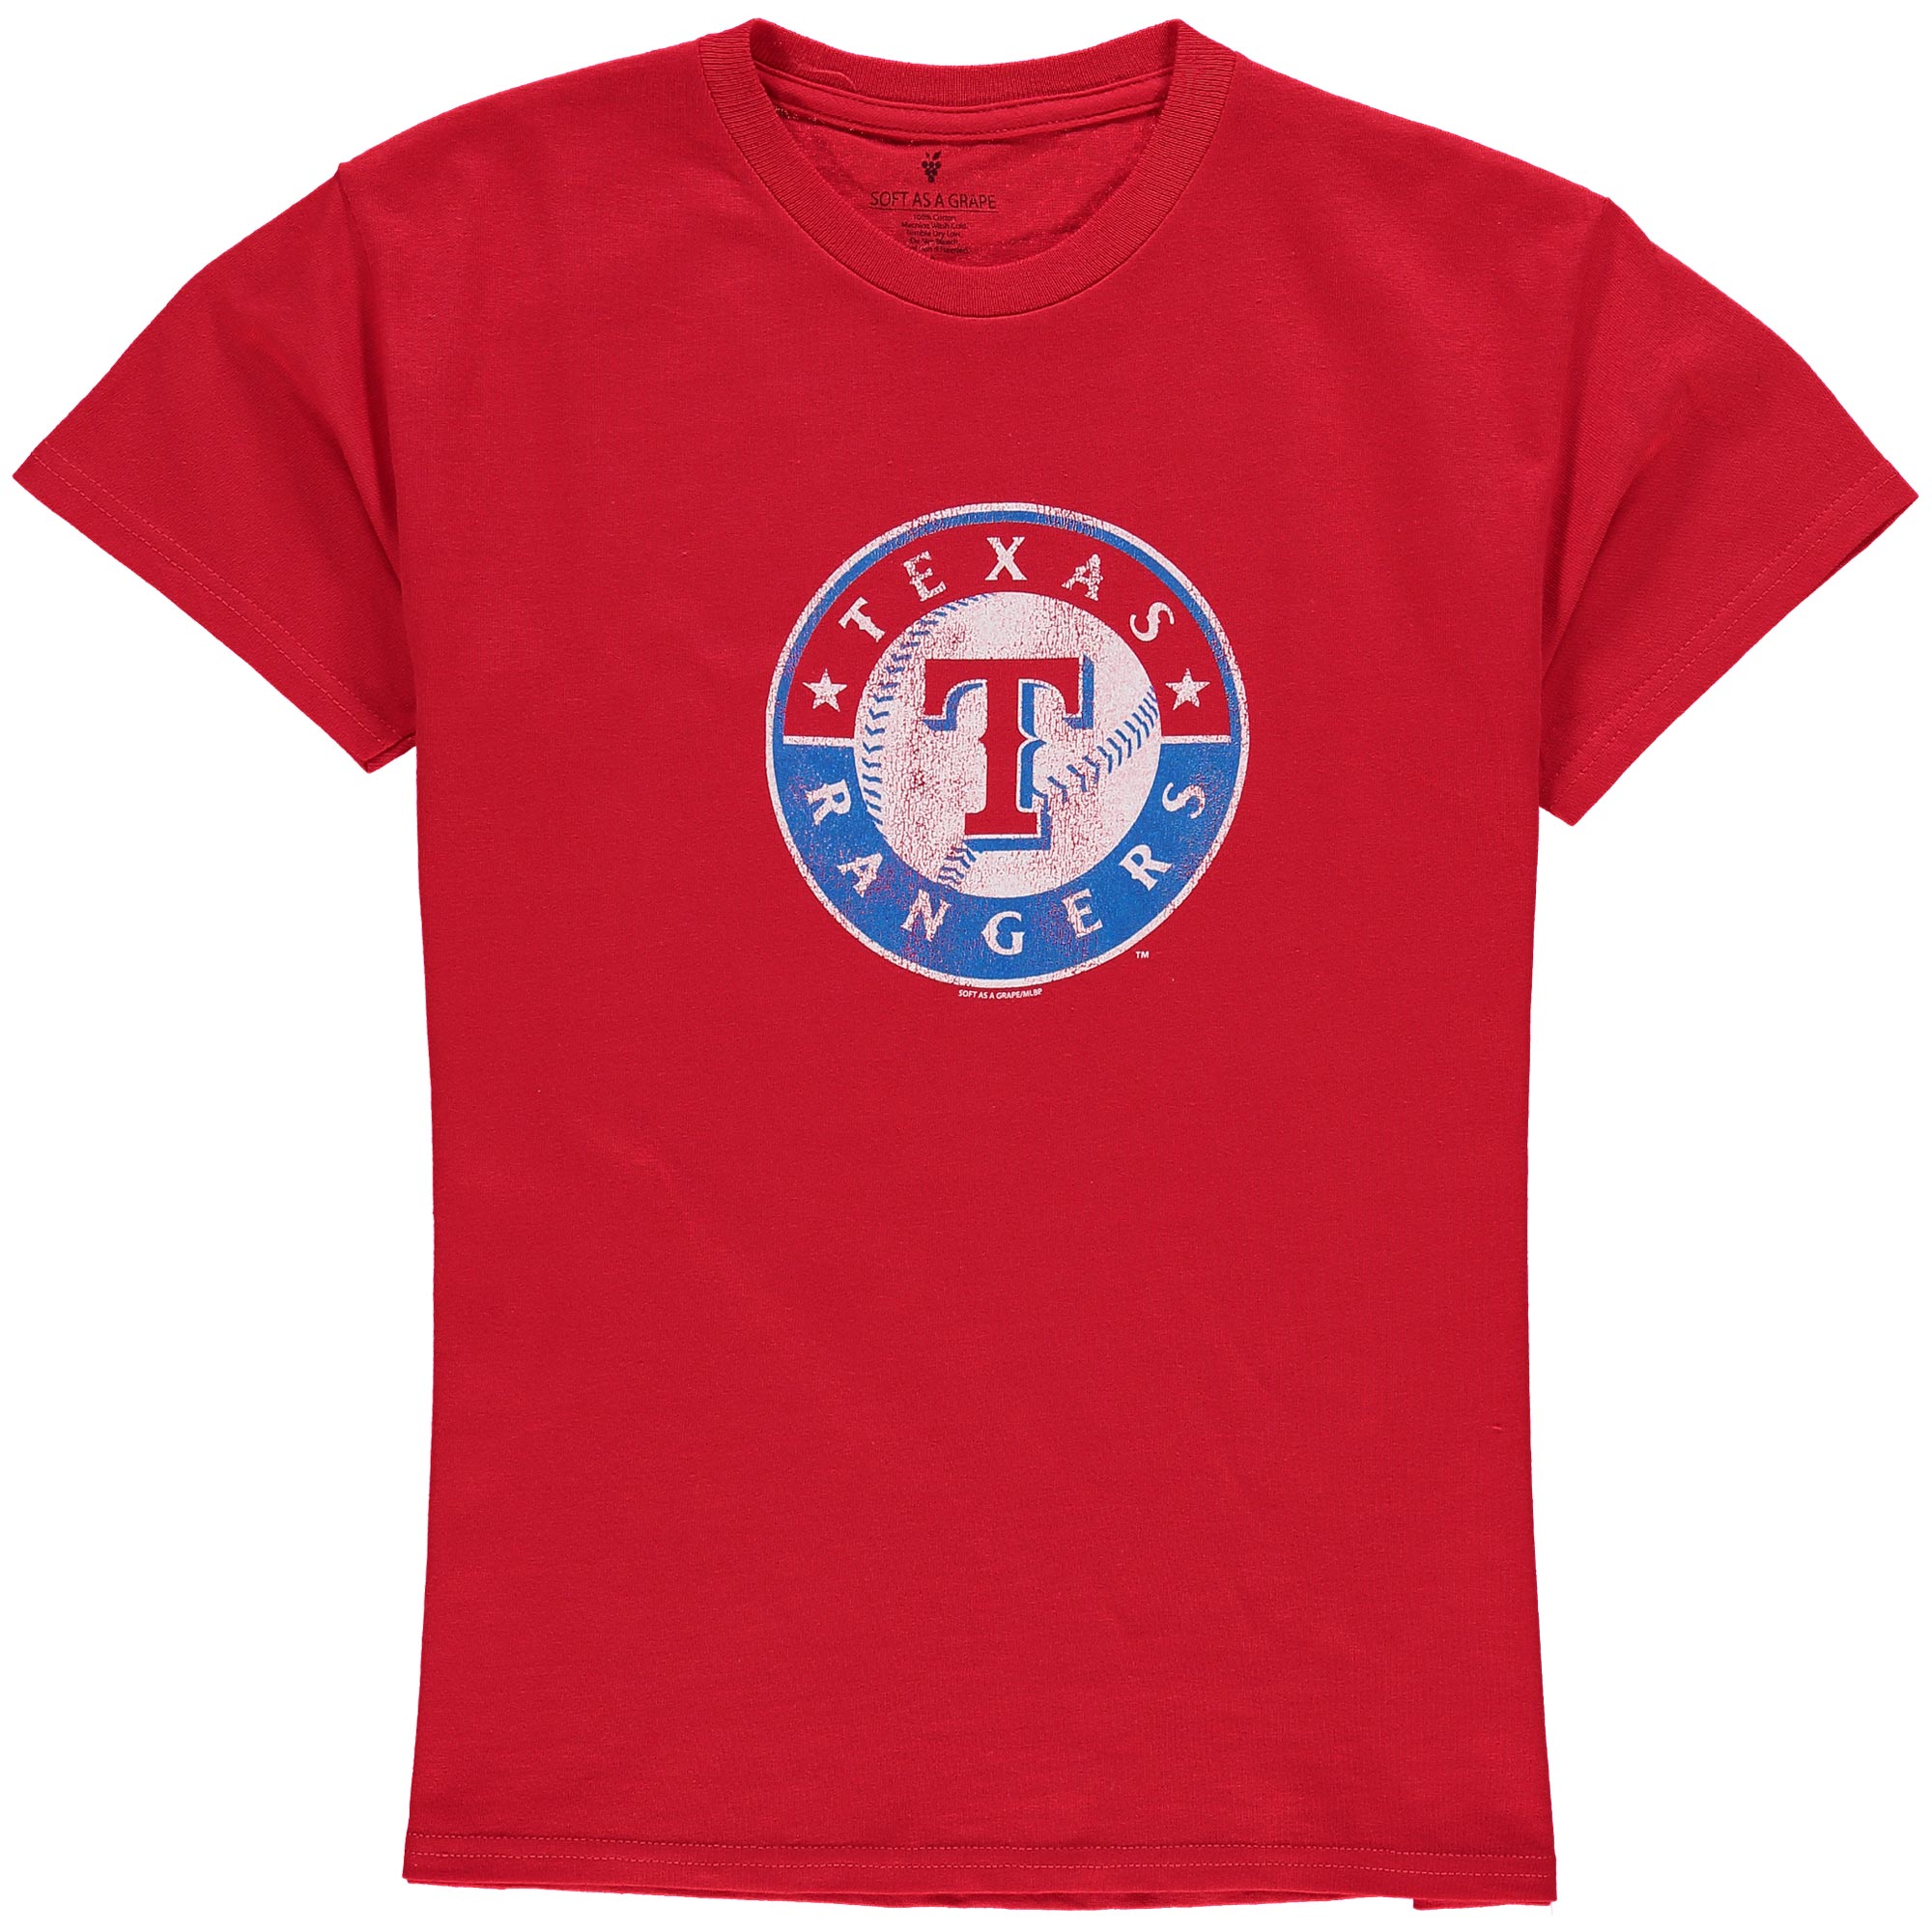 Texas Rangers Youth Distressed Logo T-Shirt - Red - image 1 of 2